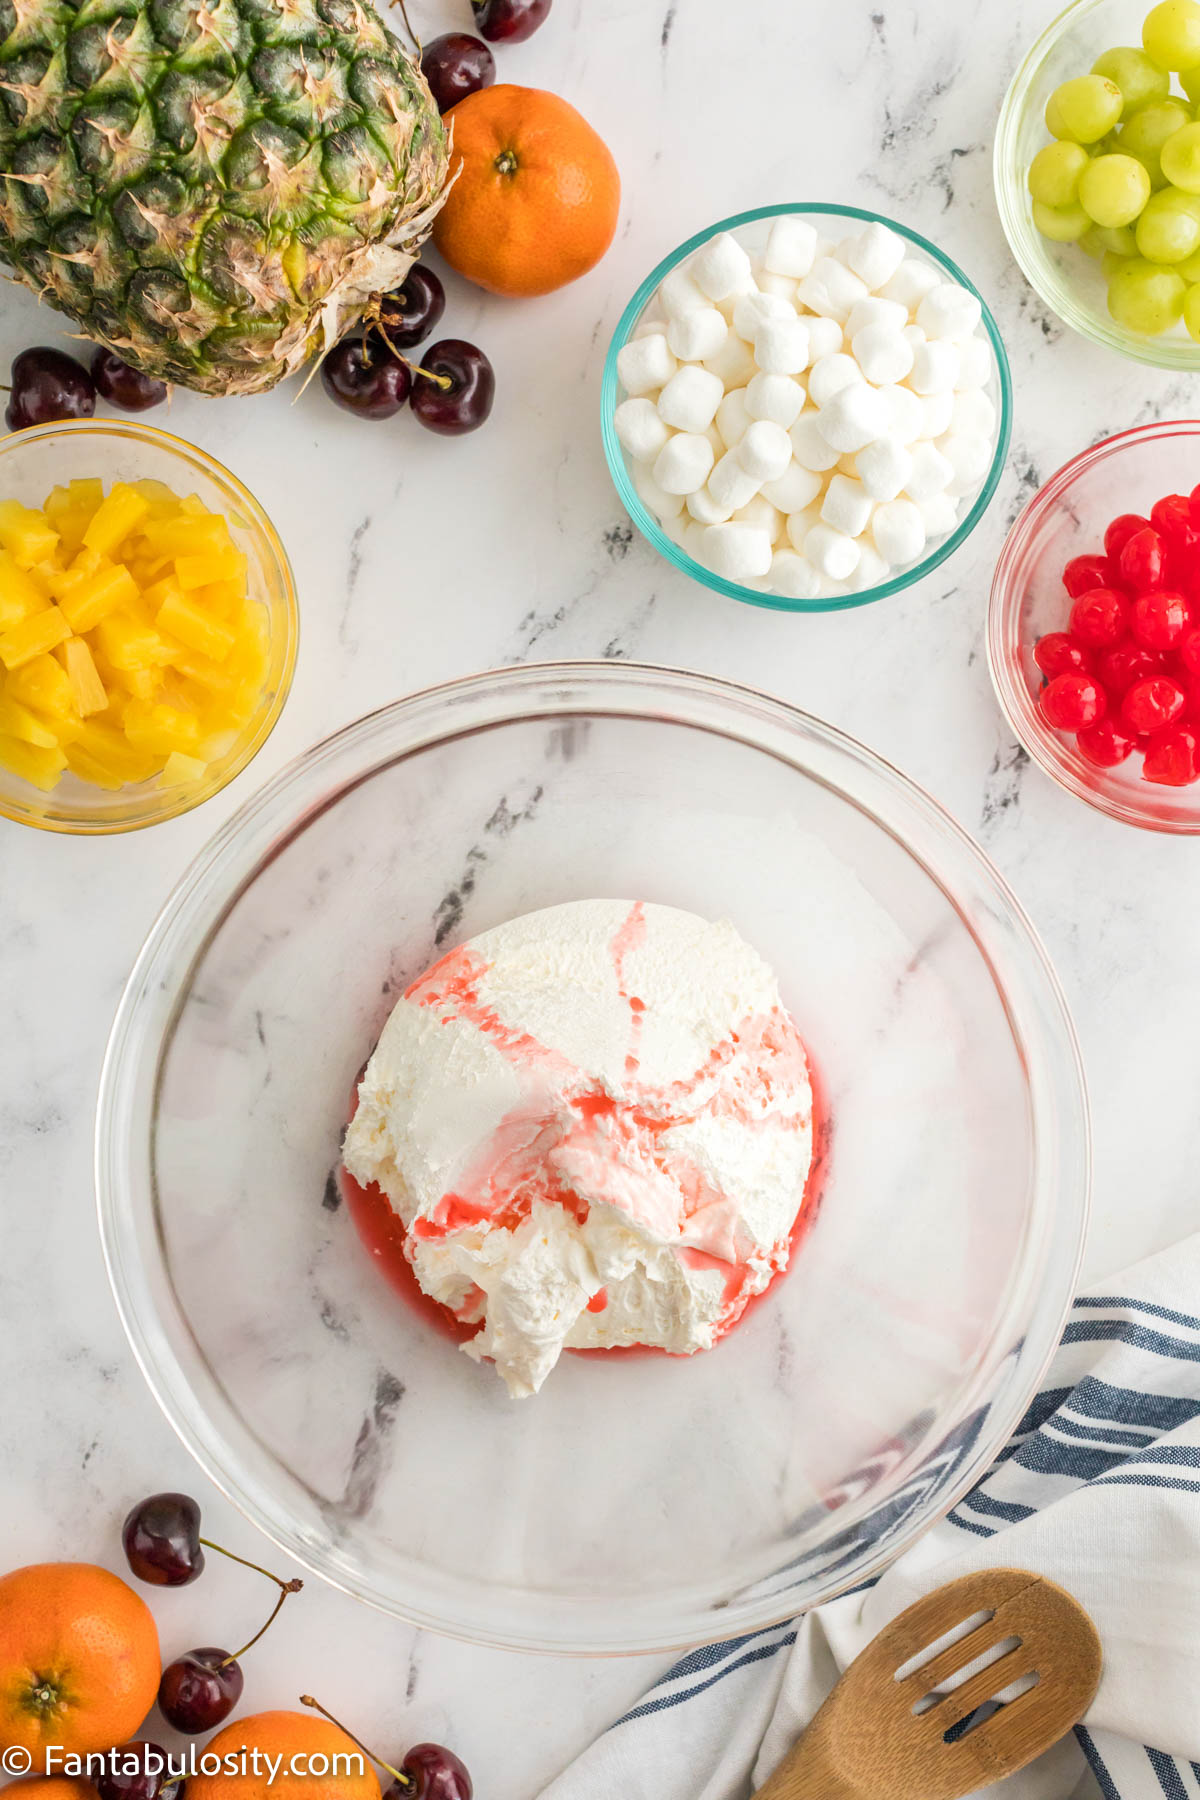 How to make fruit salad with cool whip